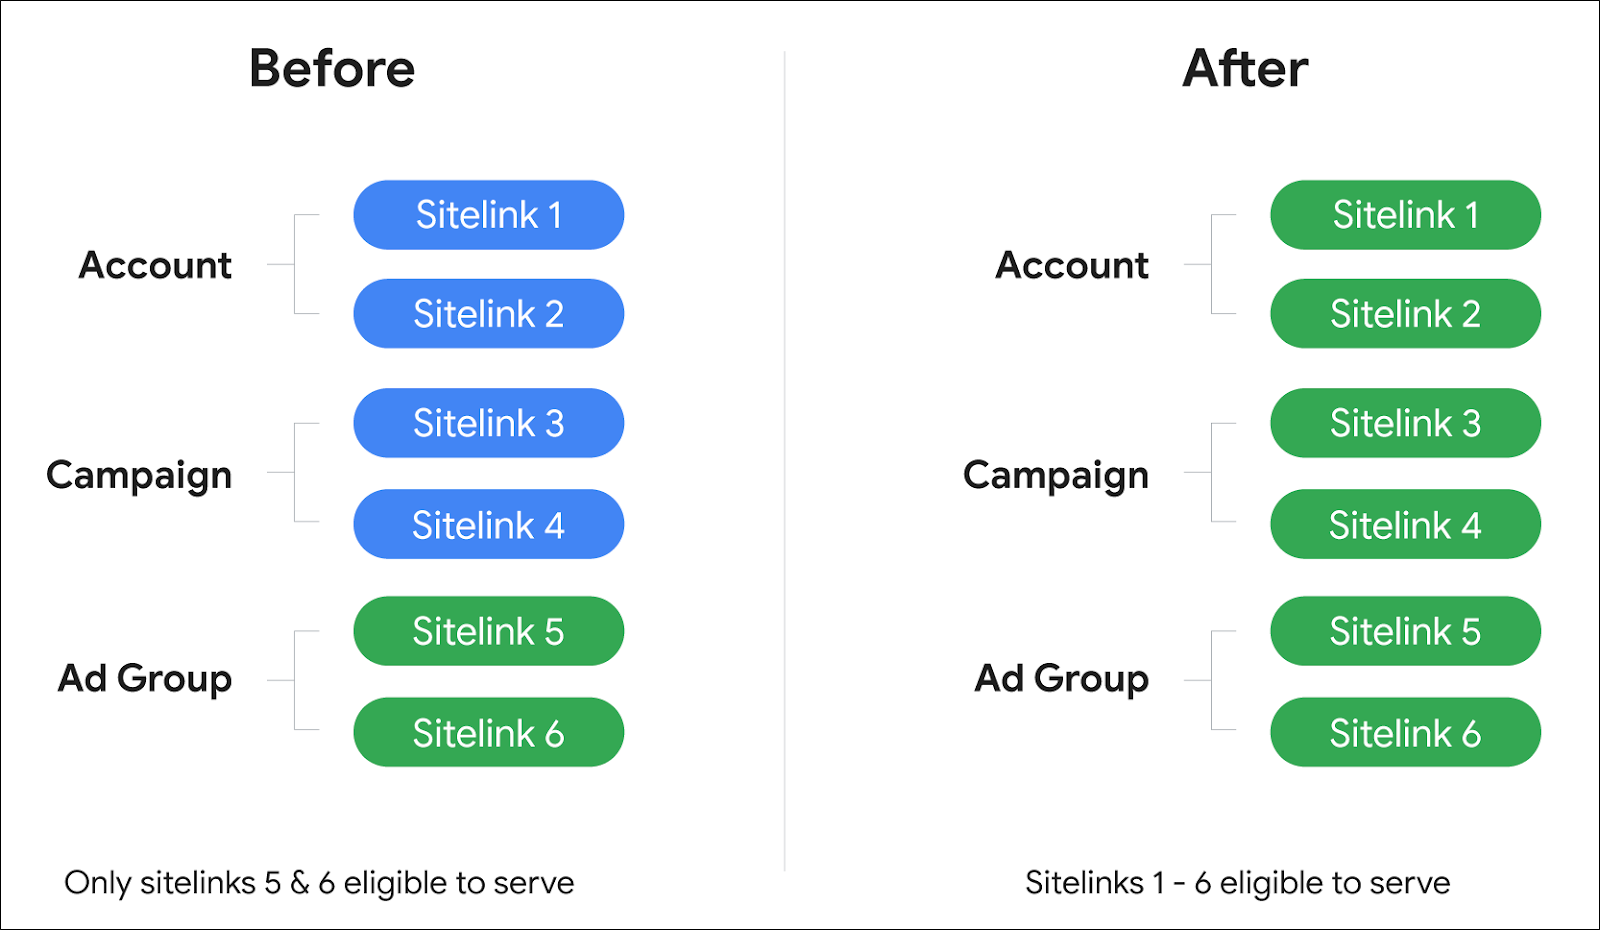 A before and after comparison of eligible sitelinks to serve.